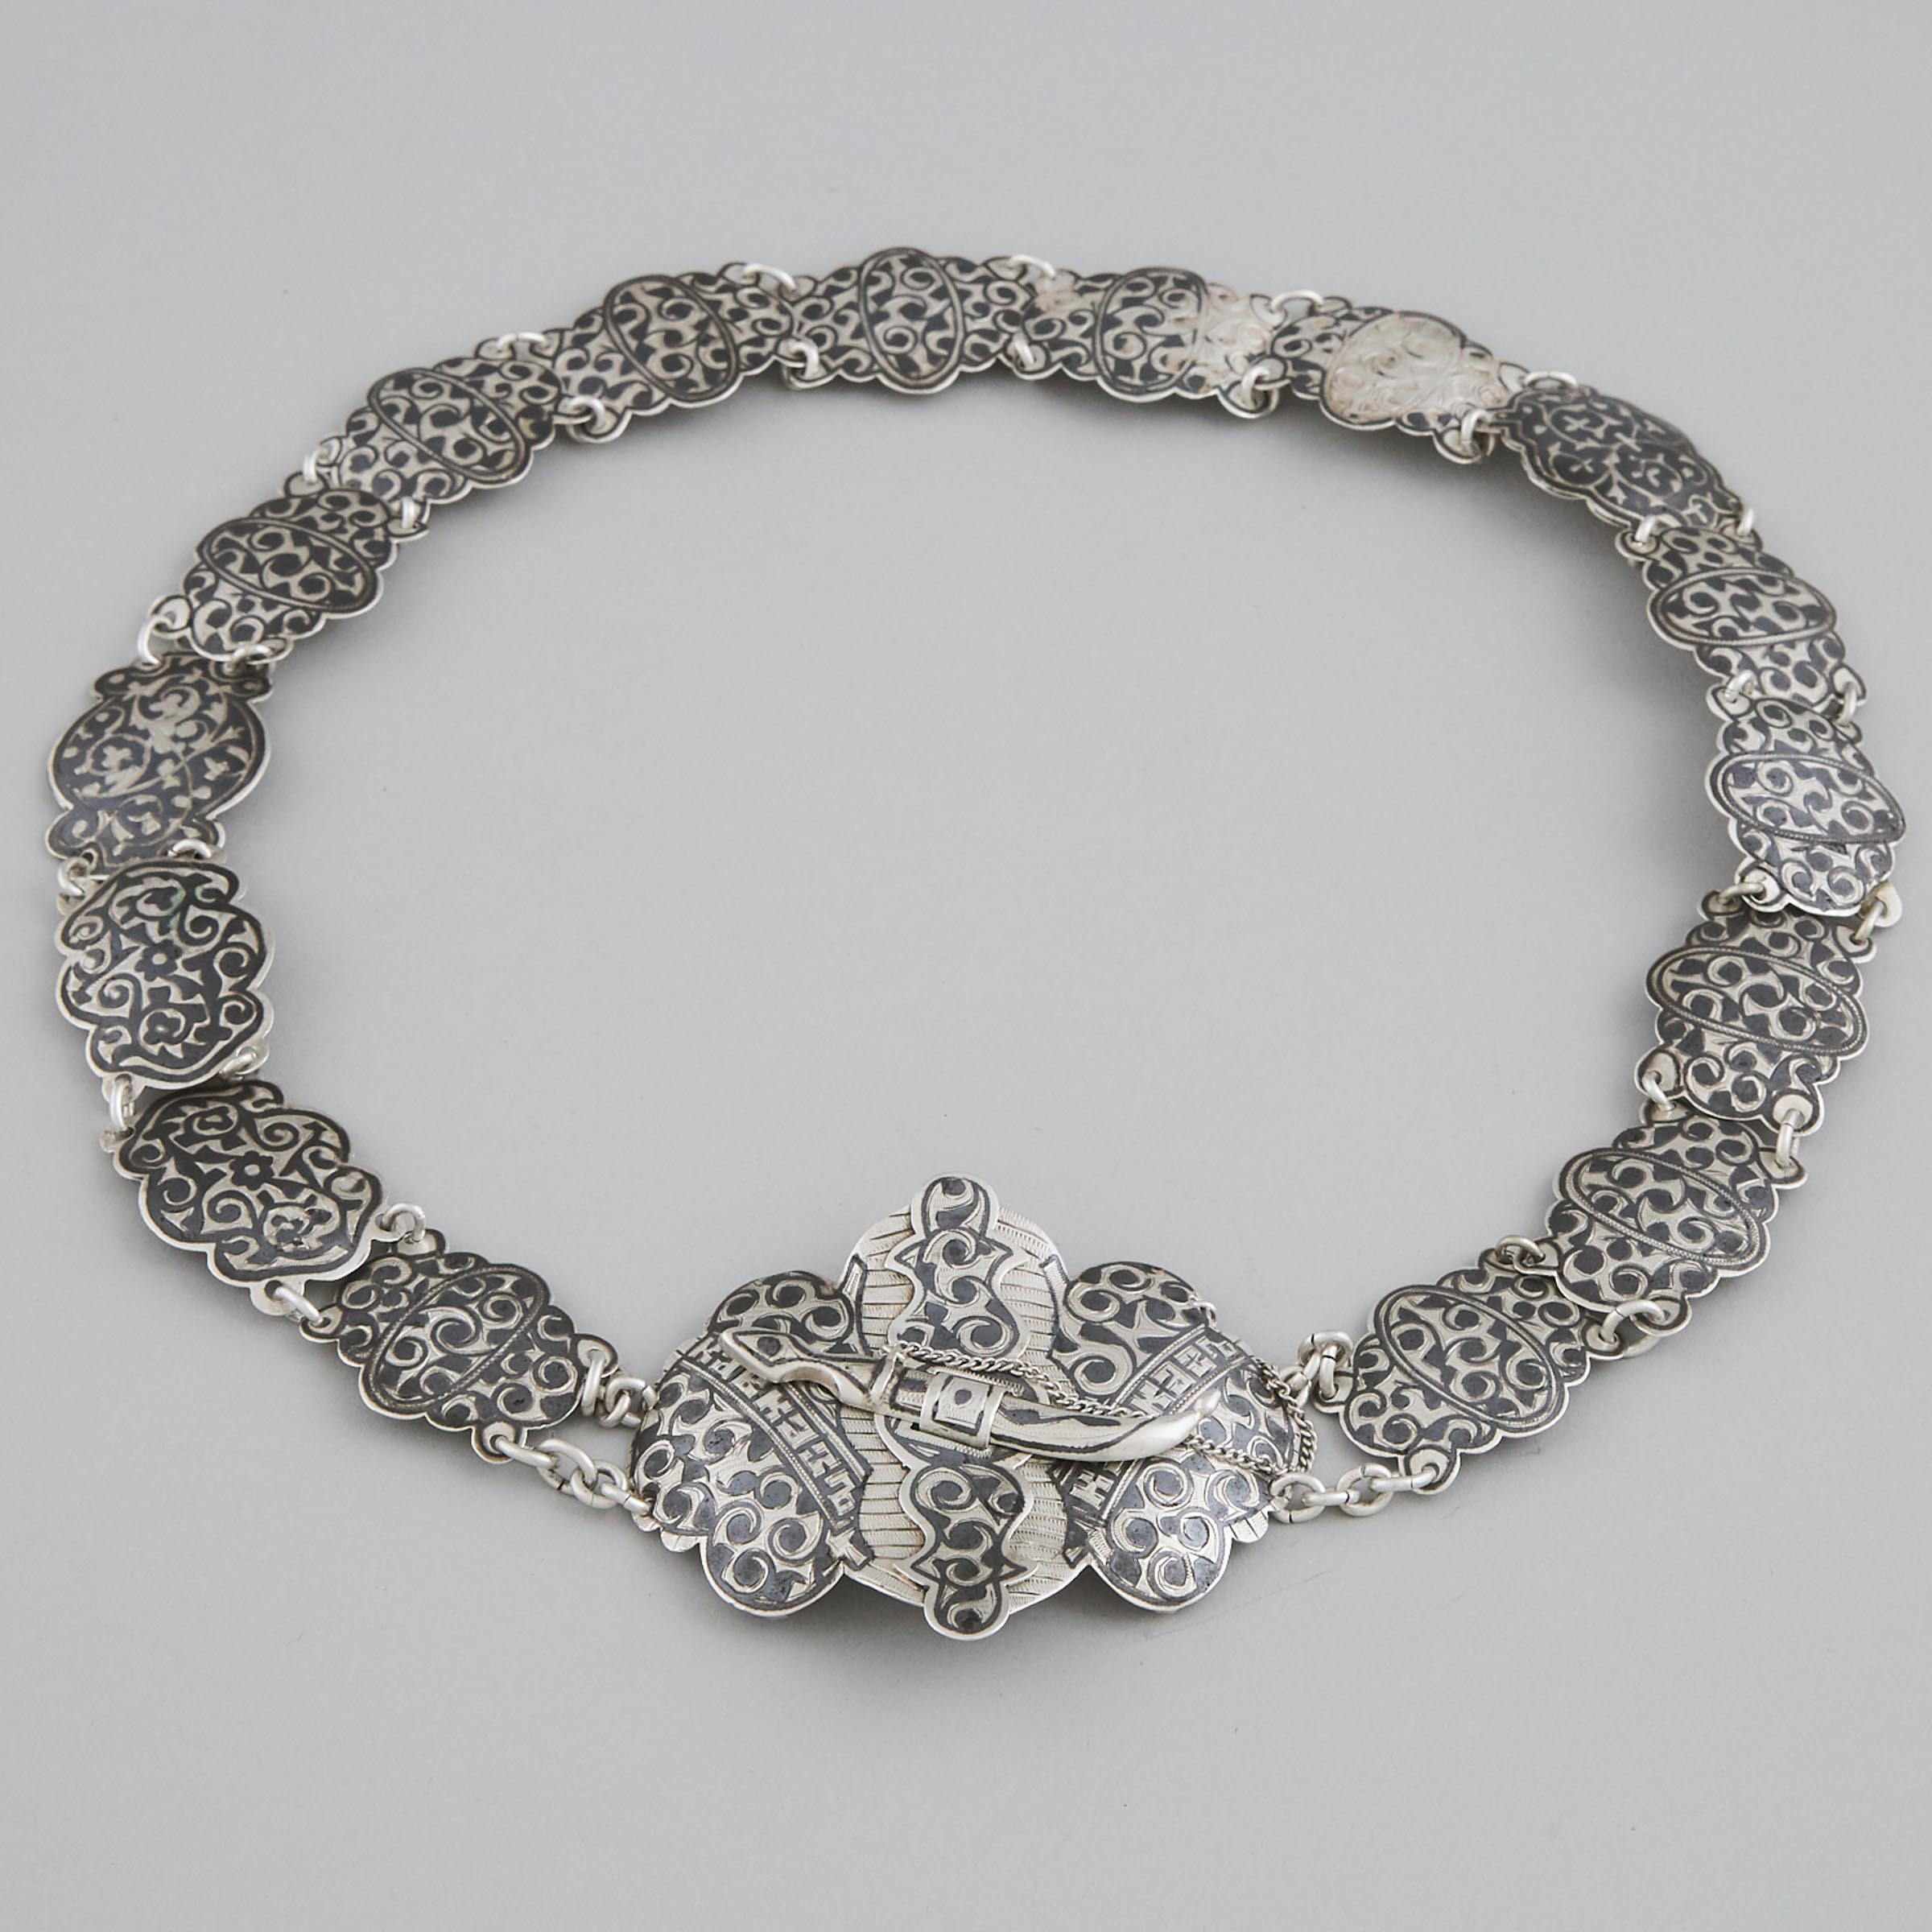 Russian Engraved and Nielloed Silver Belt, late 19th/early 20th century